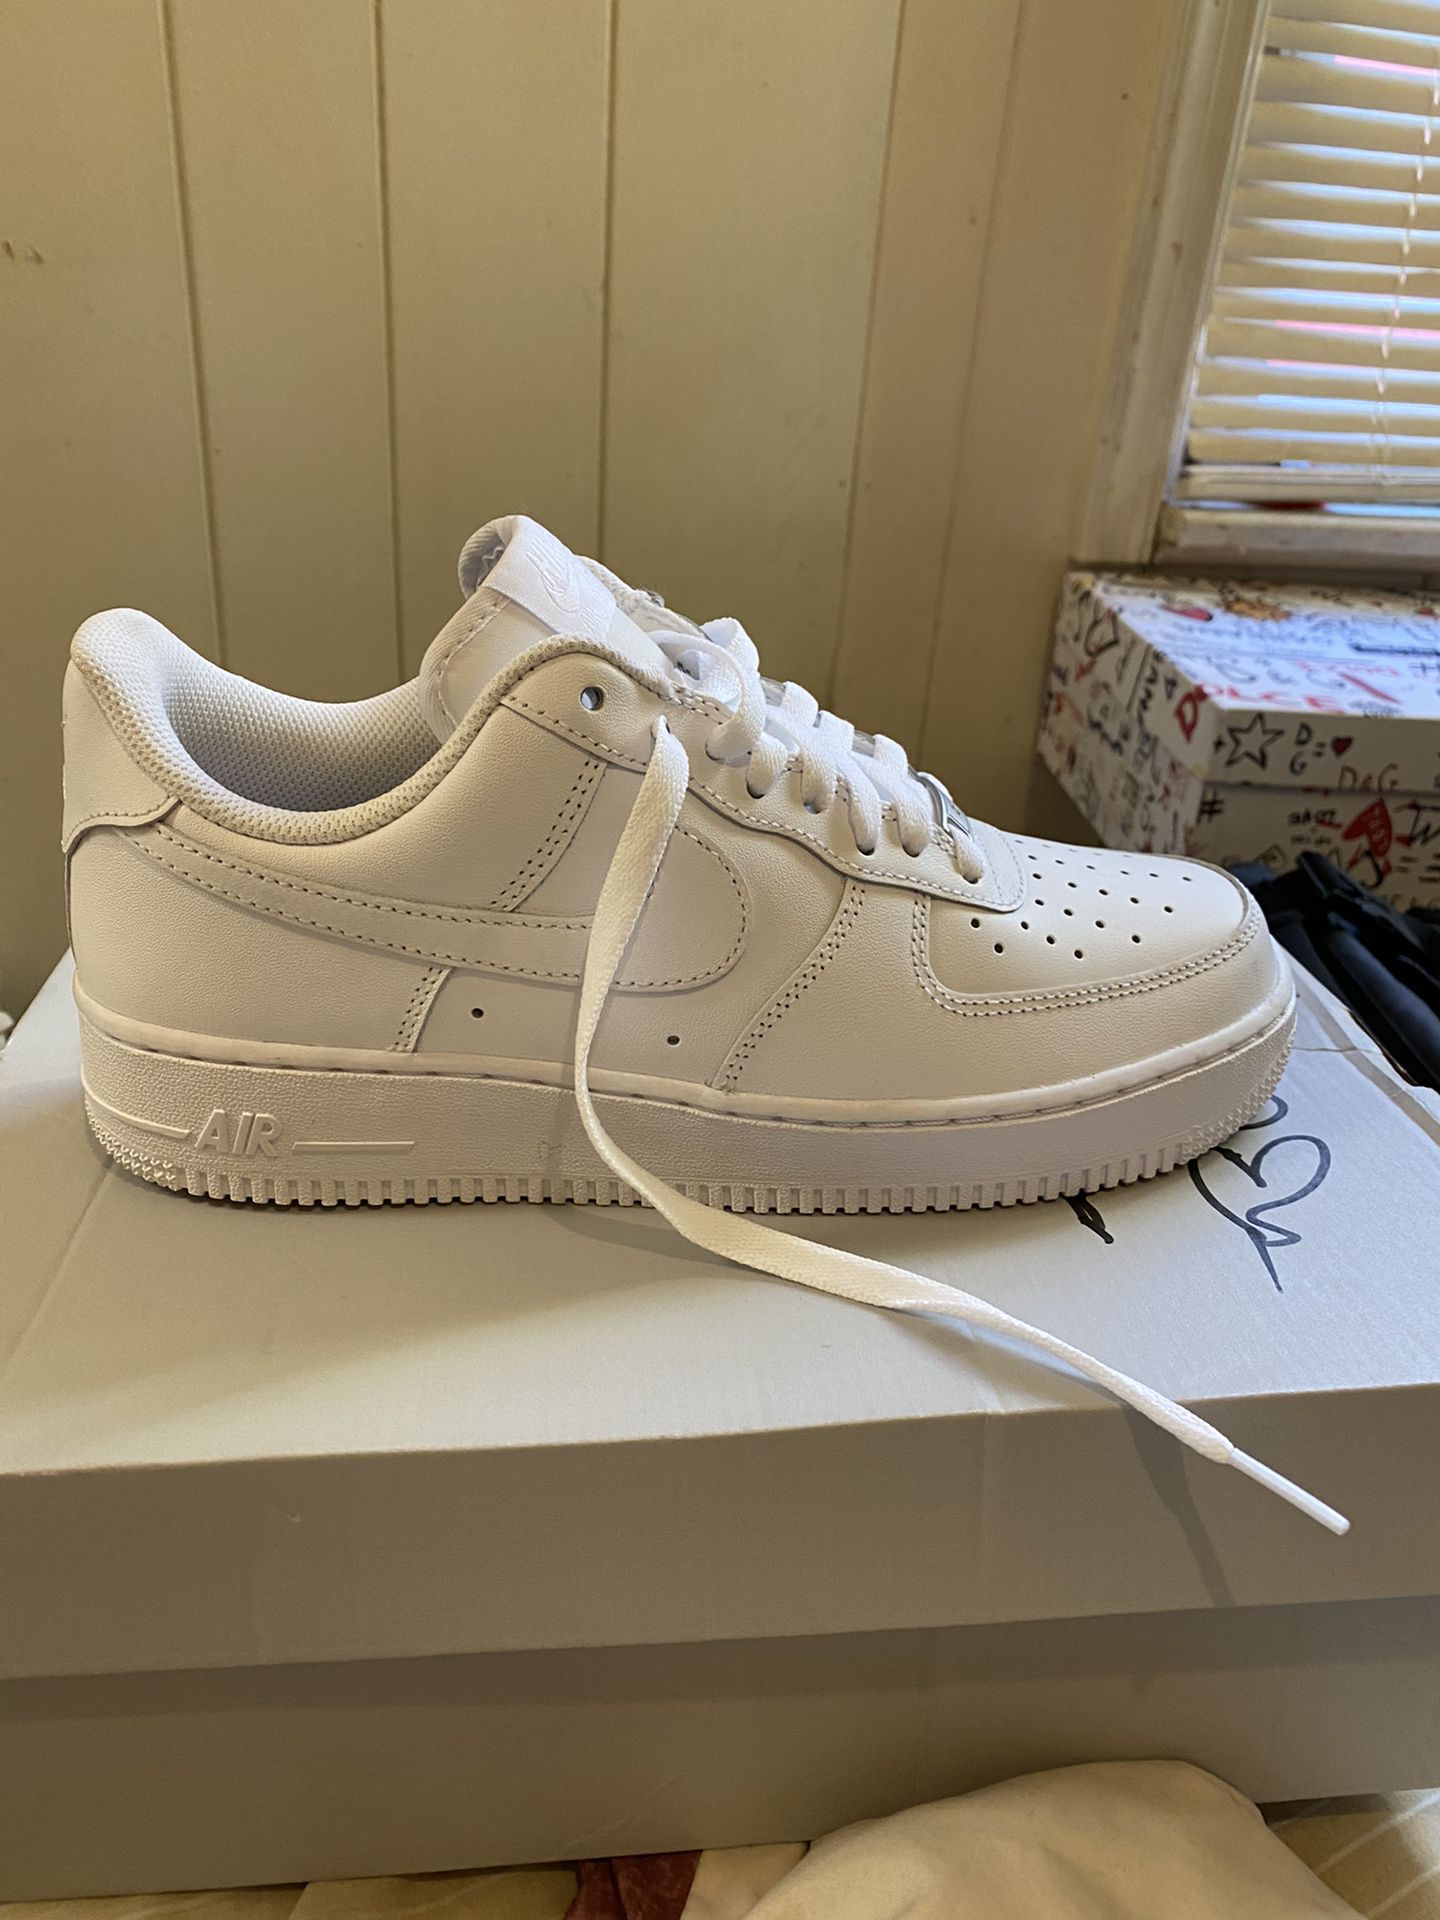 AIR FORCE 1S SIZE 8 NEVER WORN DAMAGE BOX WITH RECEIPT